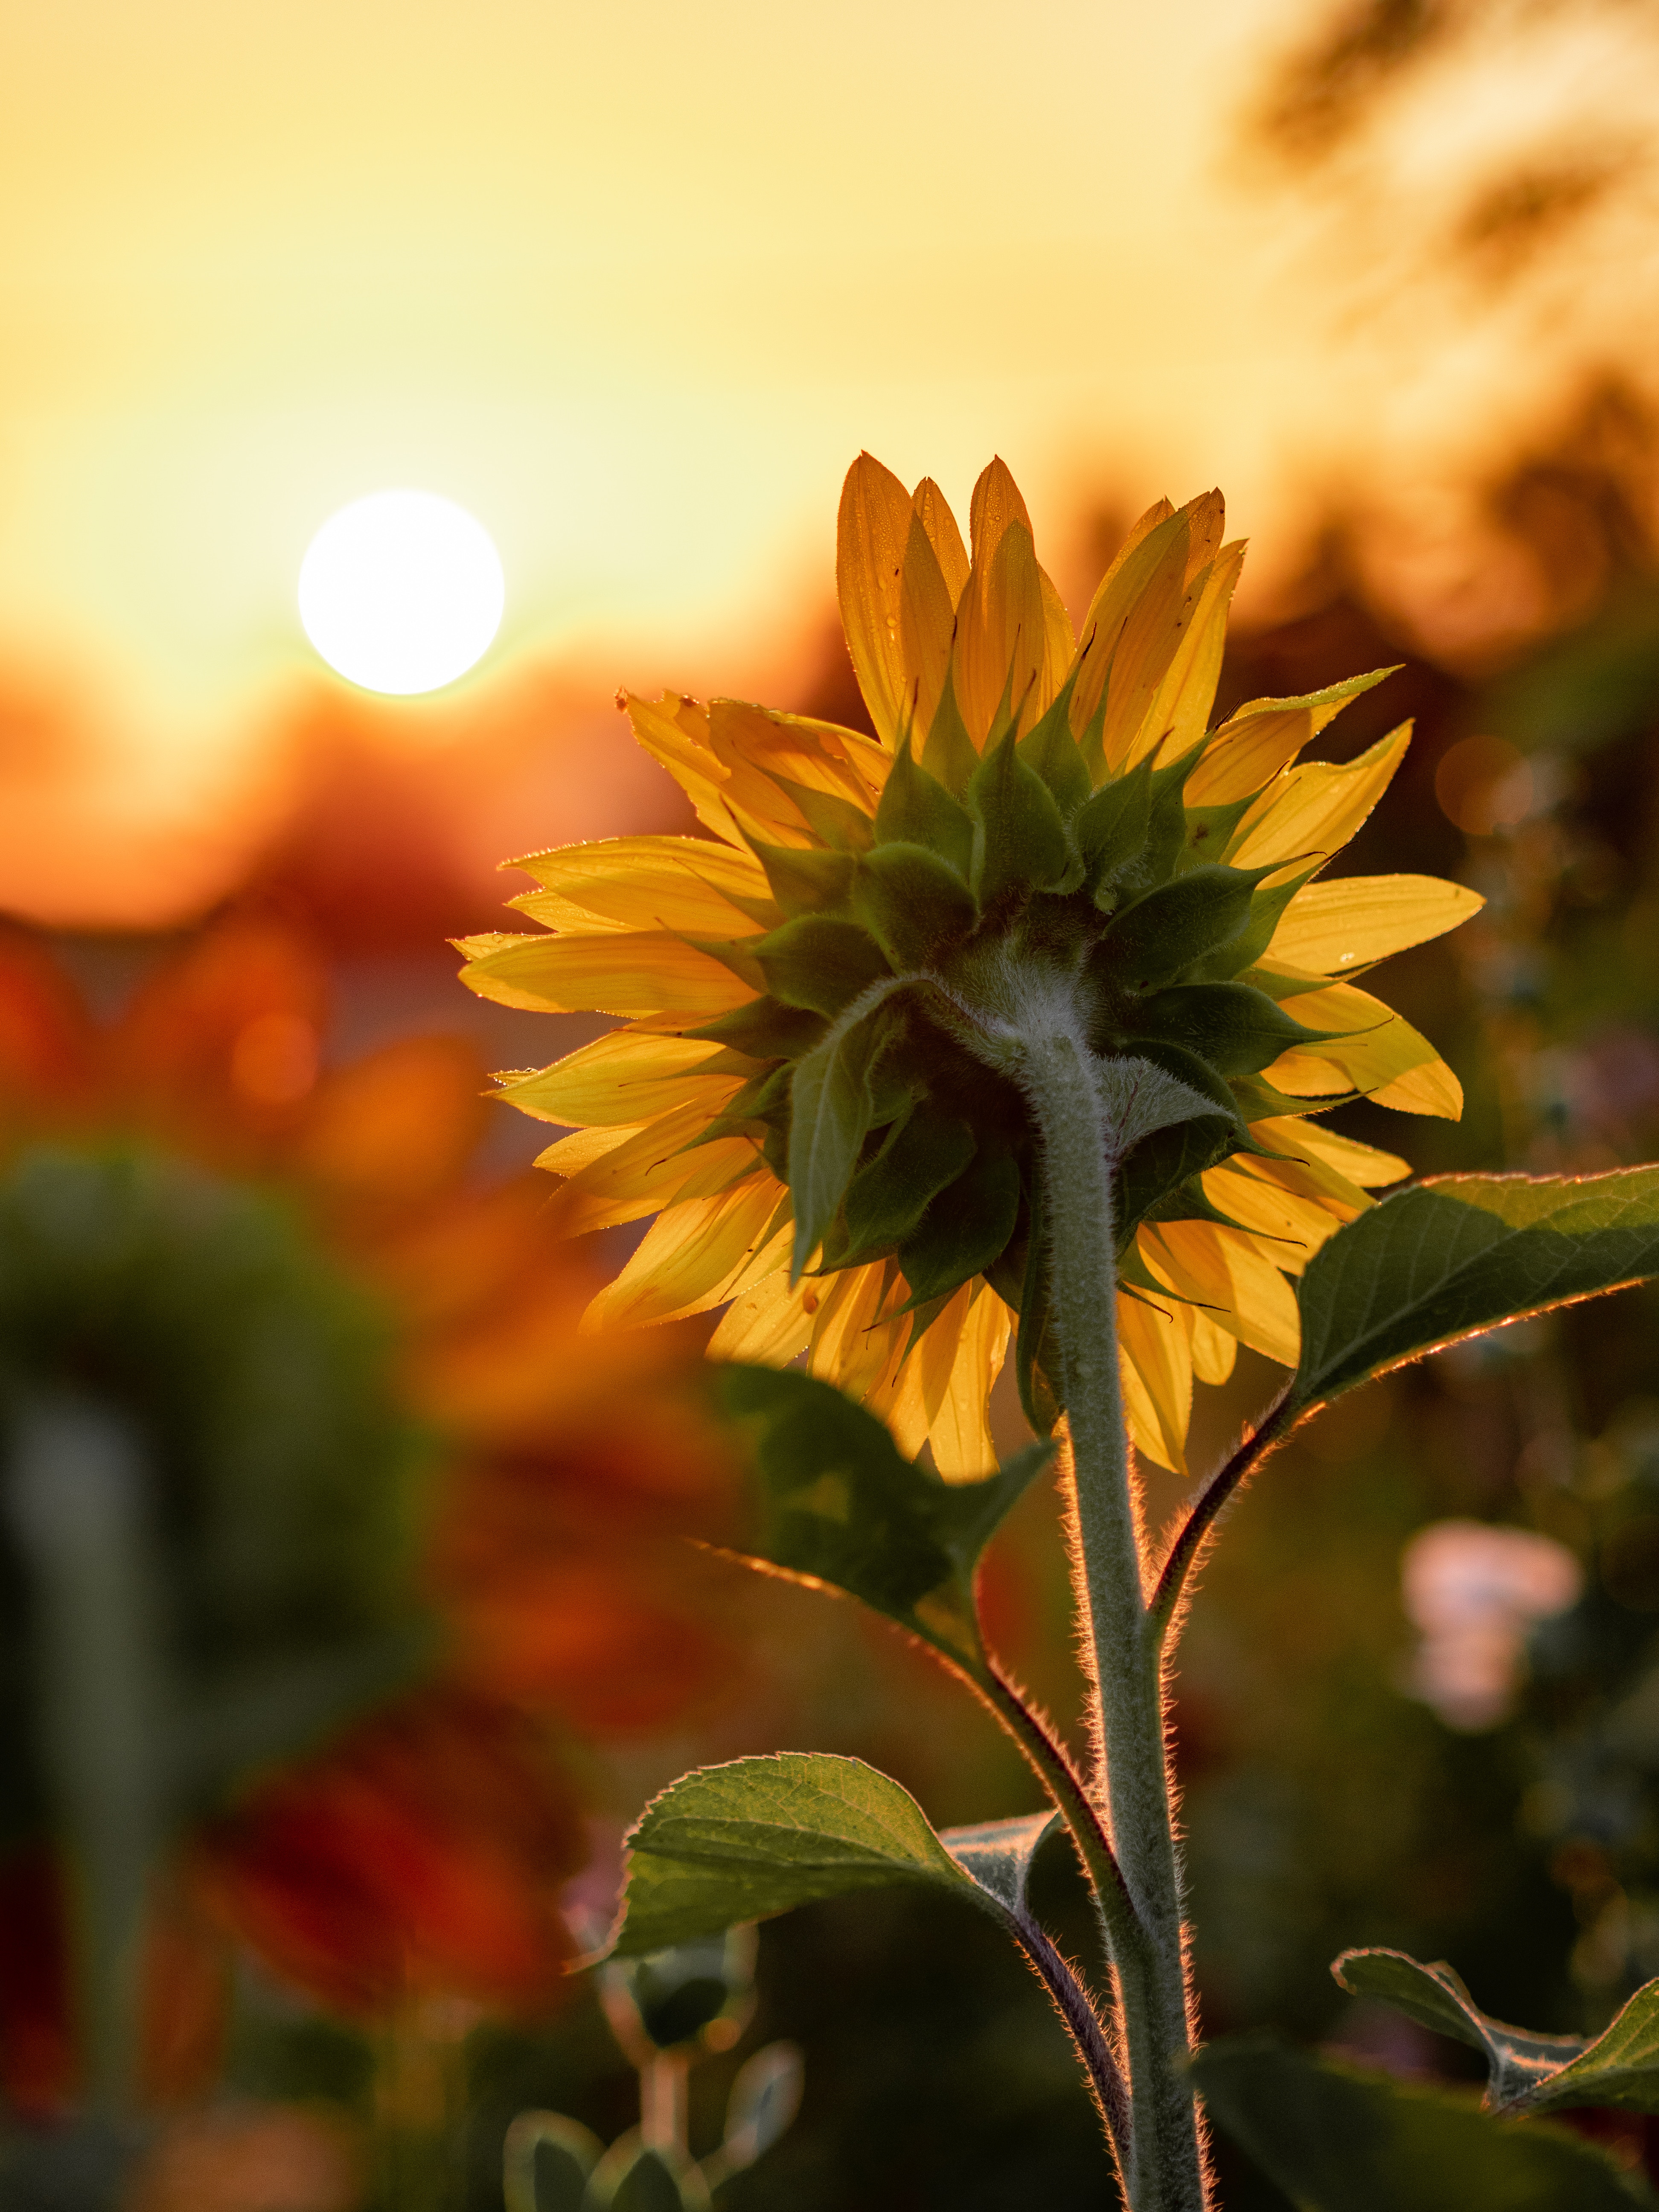 The Cancer Voice Asia | The sunflower is dedicated to every Sarcoma patients & survivors. Photo by Aaron Burden on Unsplash